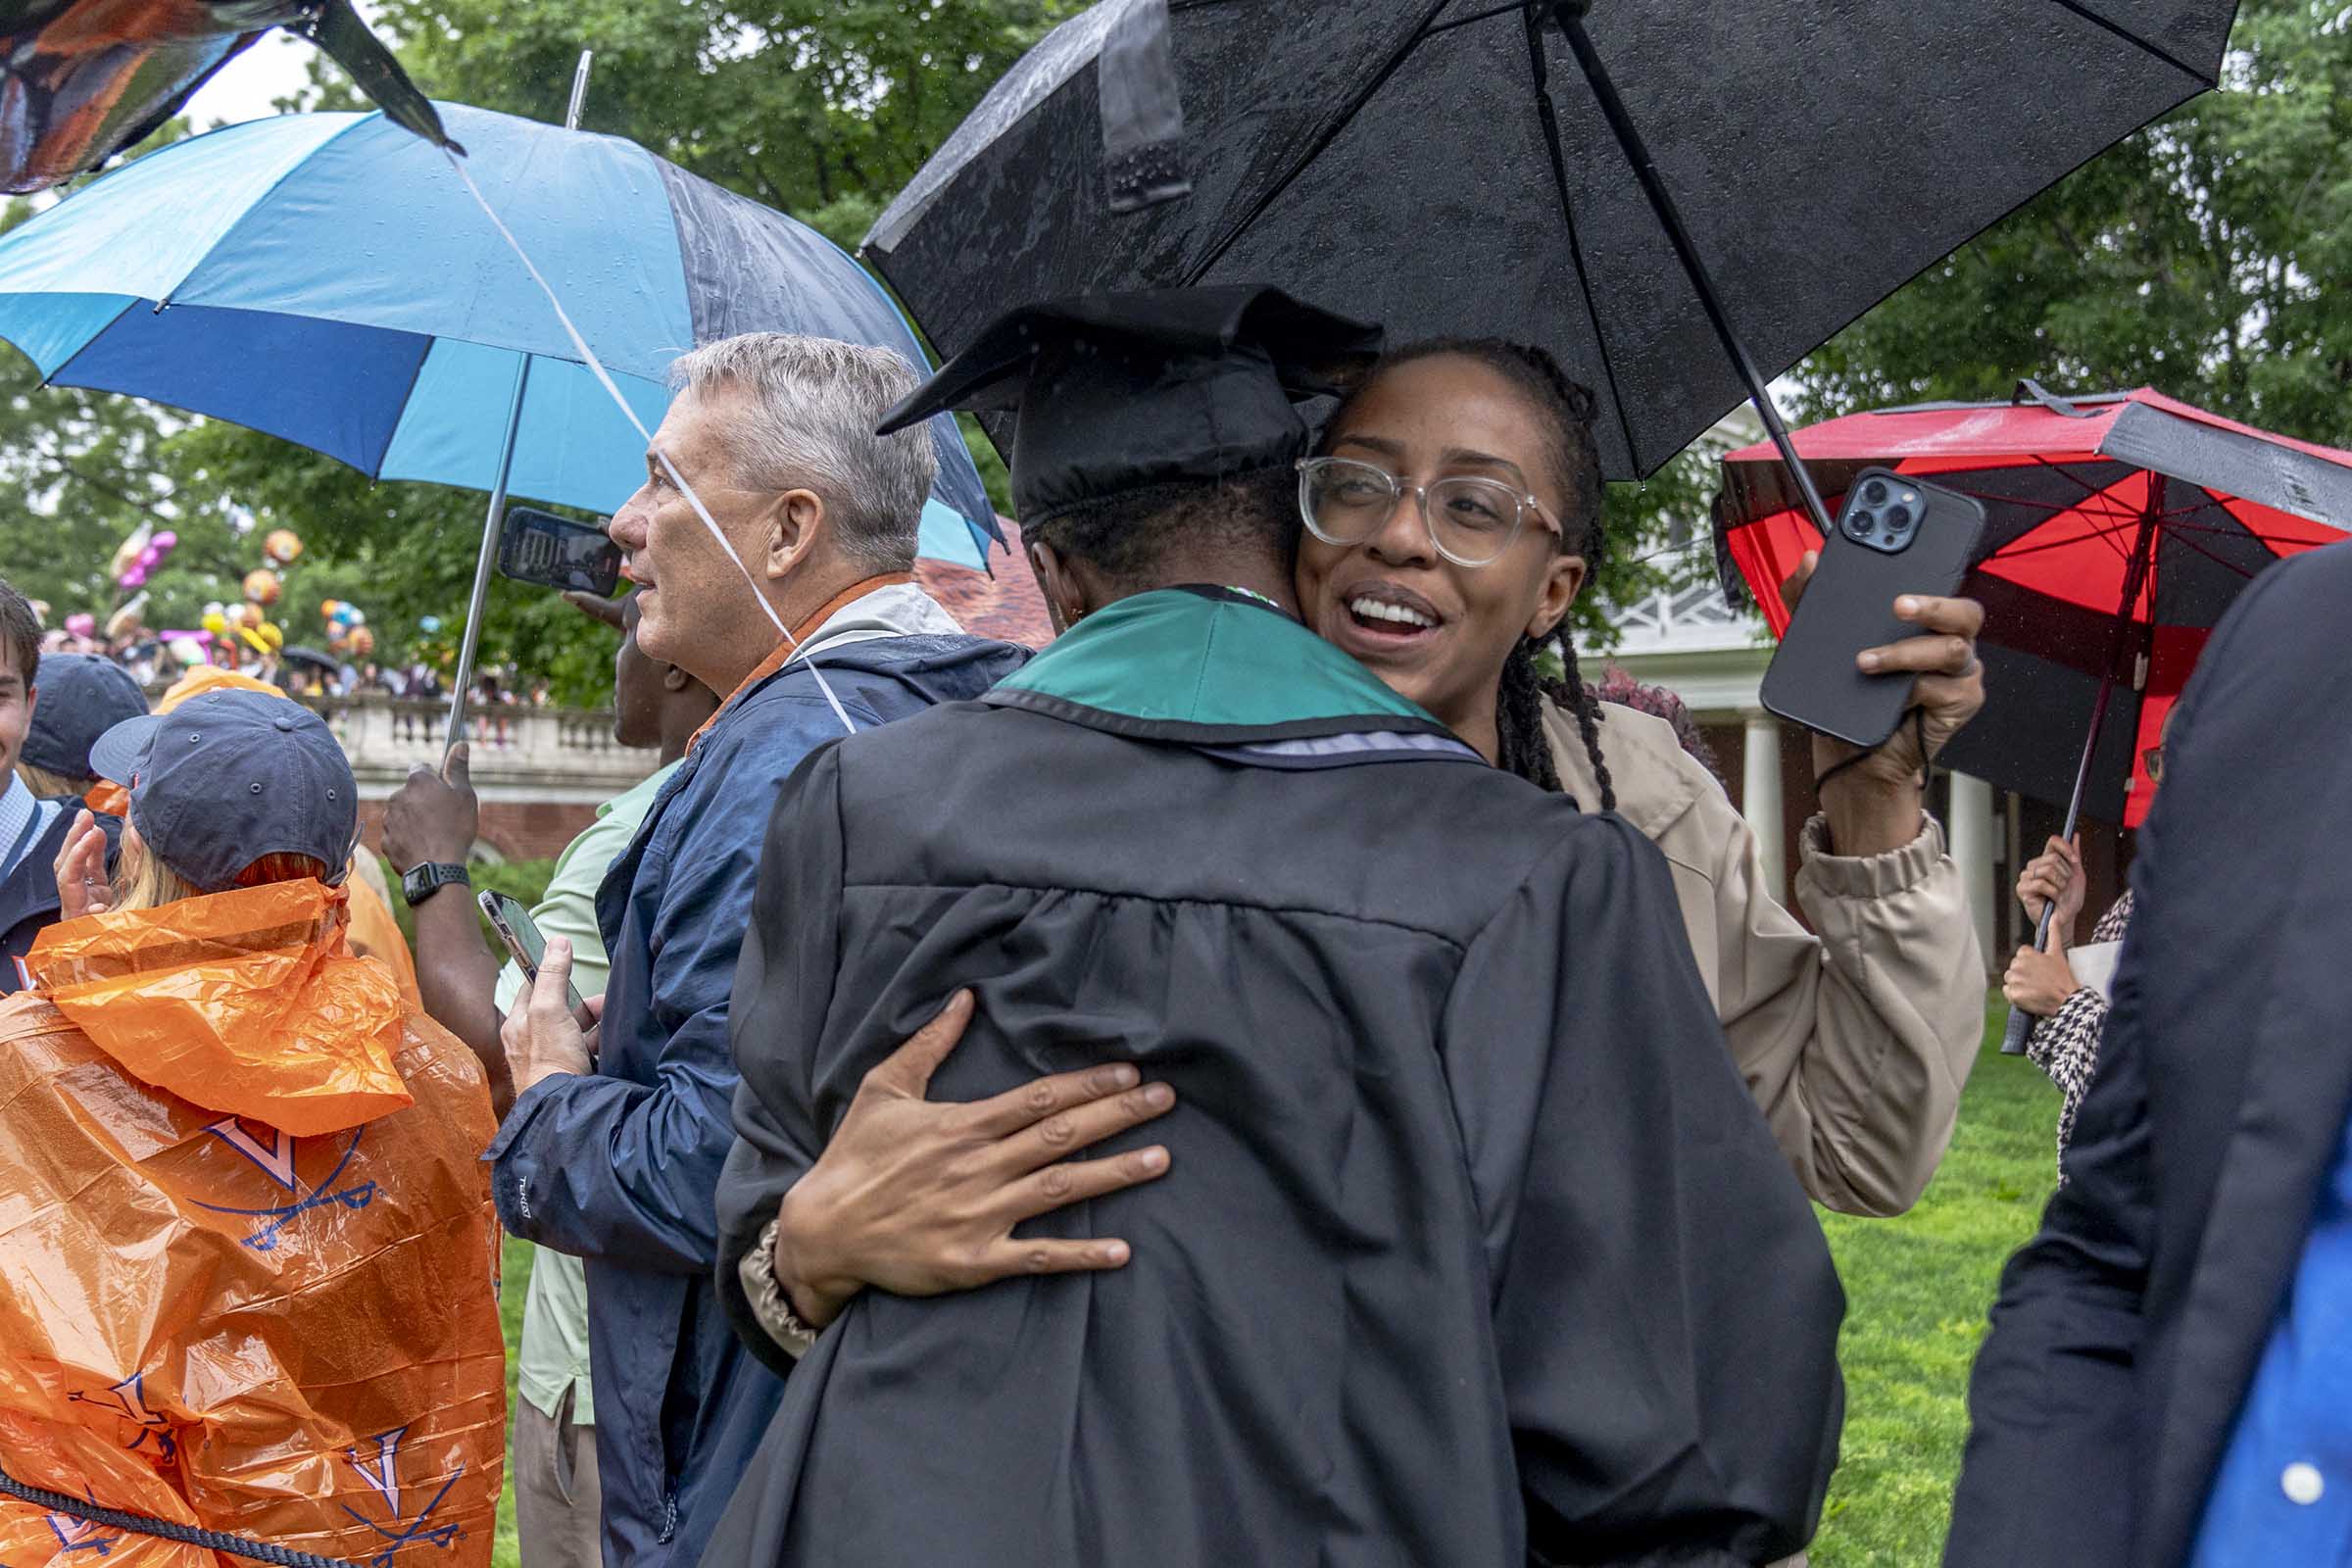 A grad and loved one embrace under an umbrella